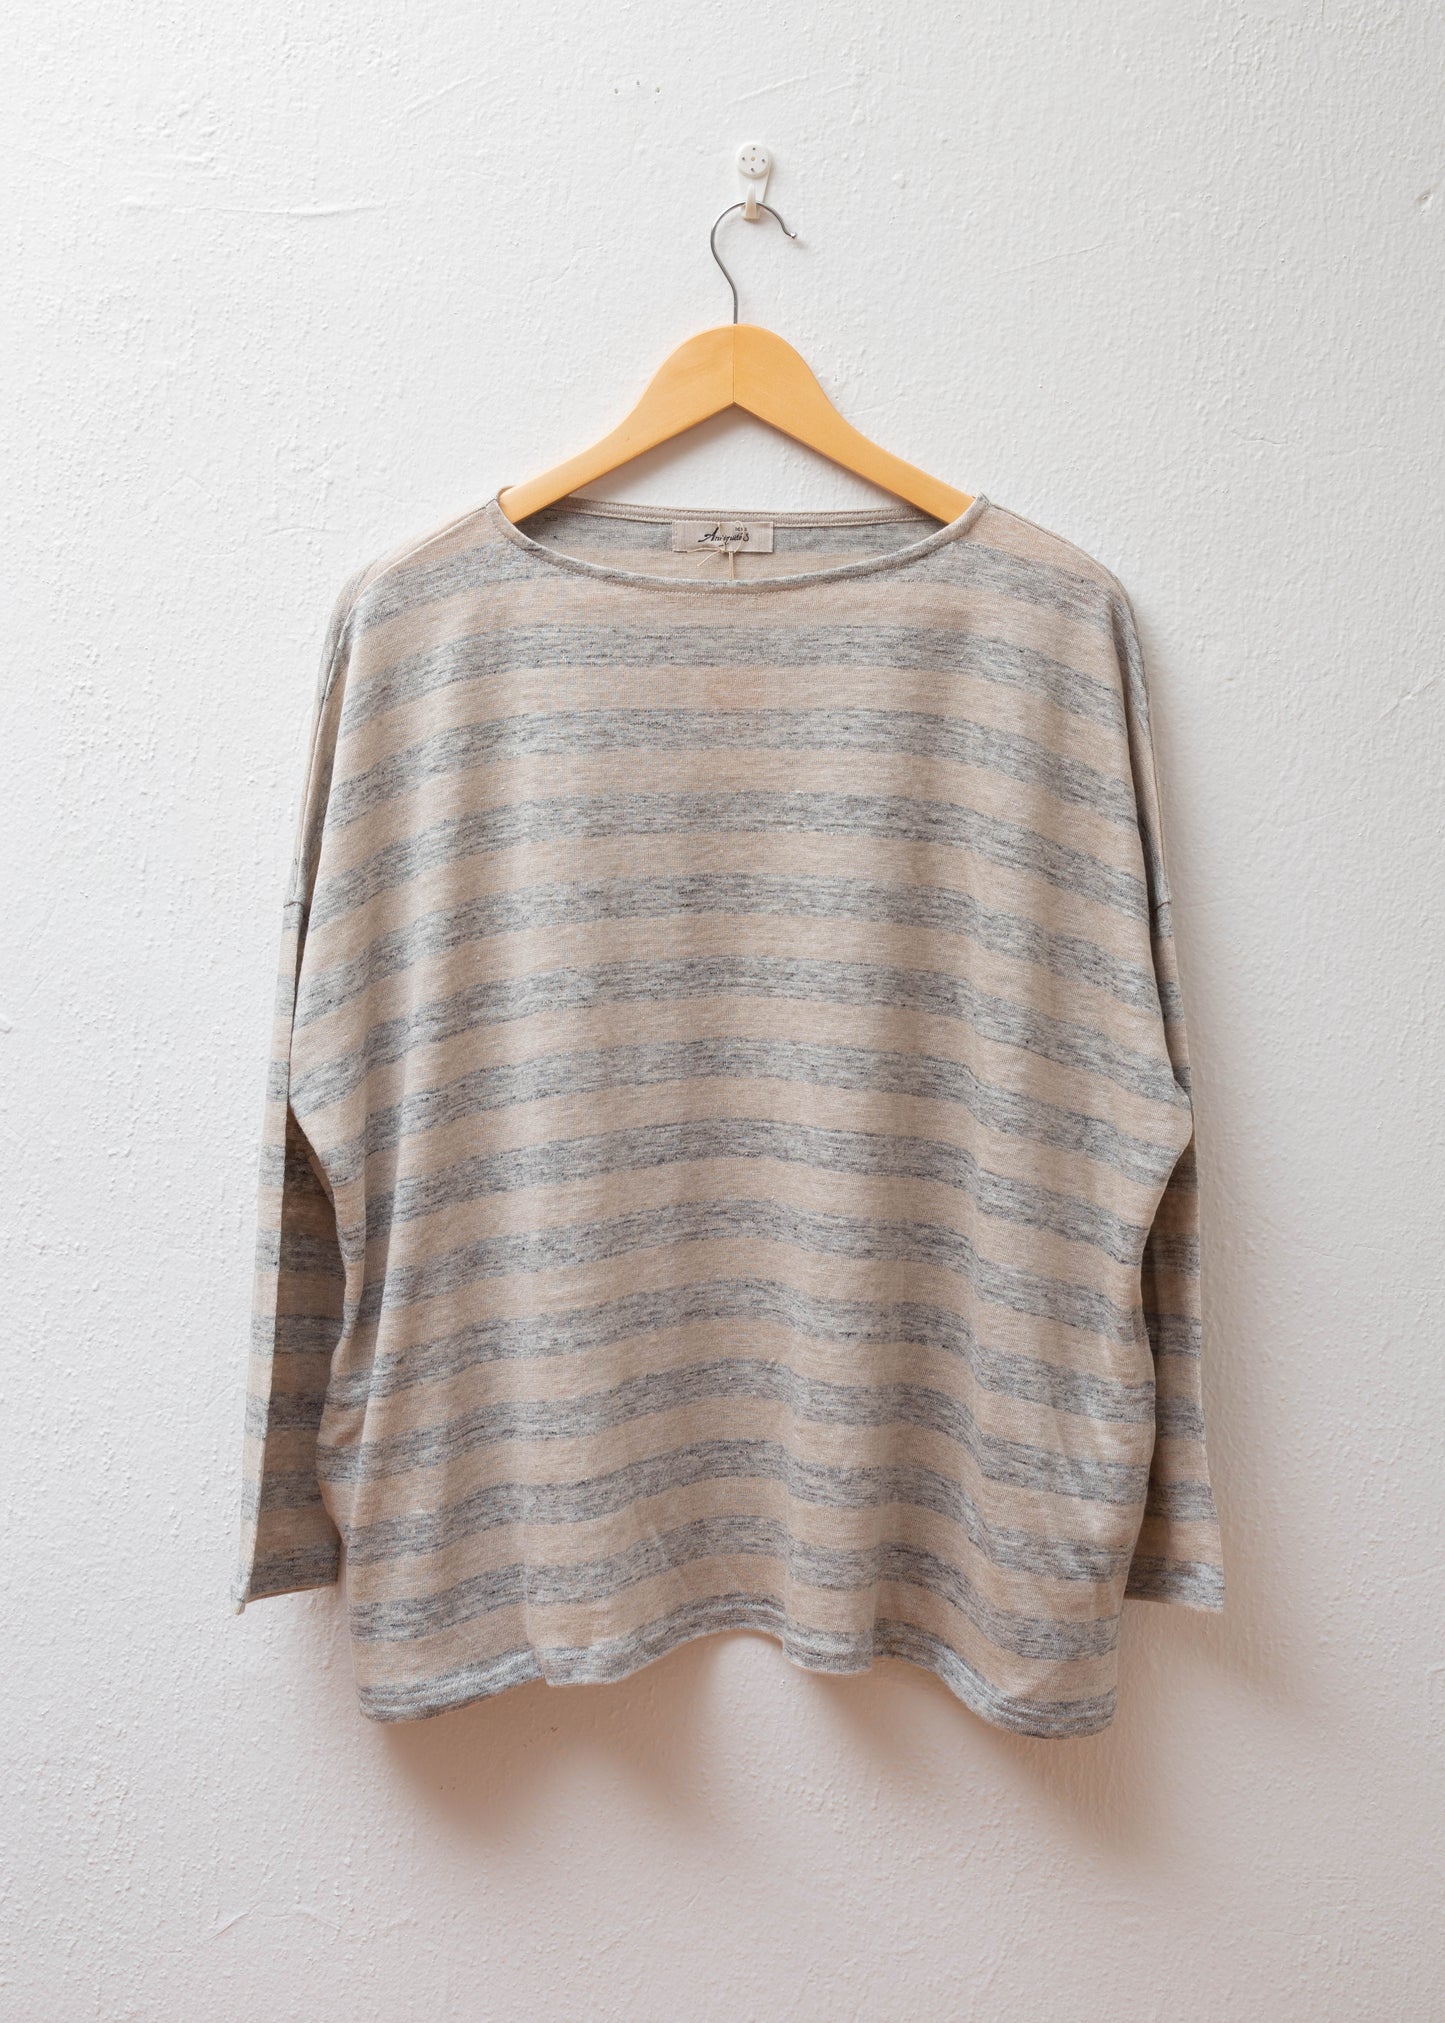 Linen Pullover in Natural/Grey hanging on a white wall